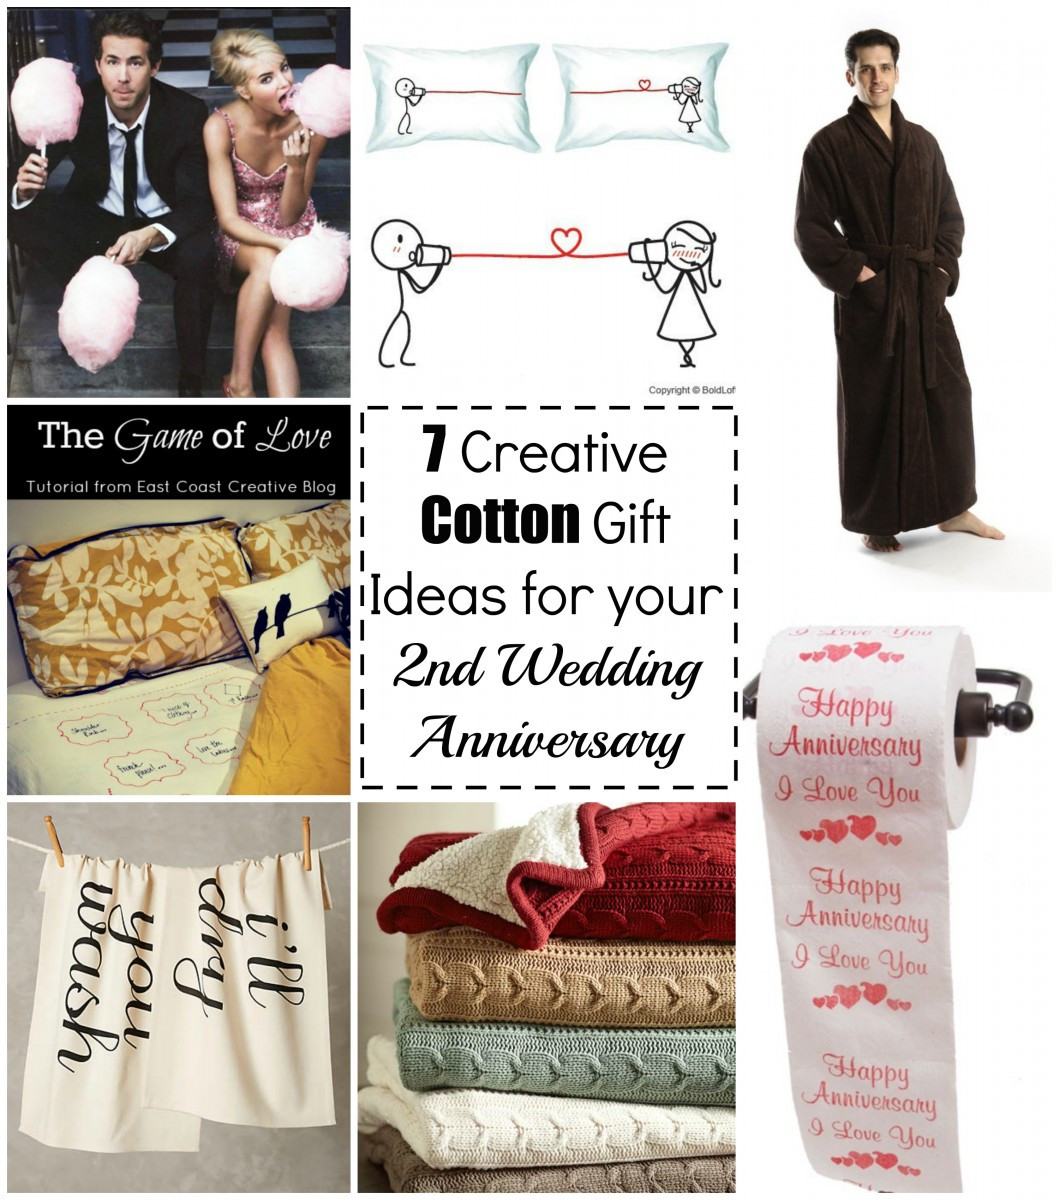 Second Wedding Anniversary Gift Ideas For Husband
 7 Cotton Gift Ideas for your 2nd Wedding Anniversary